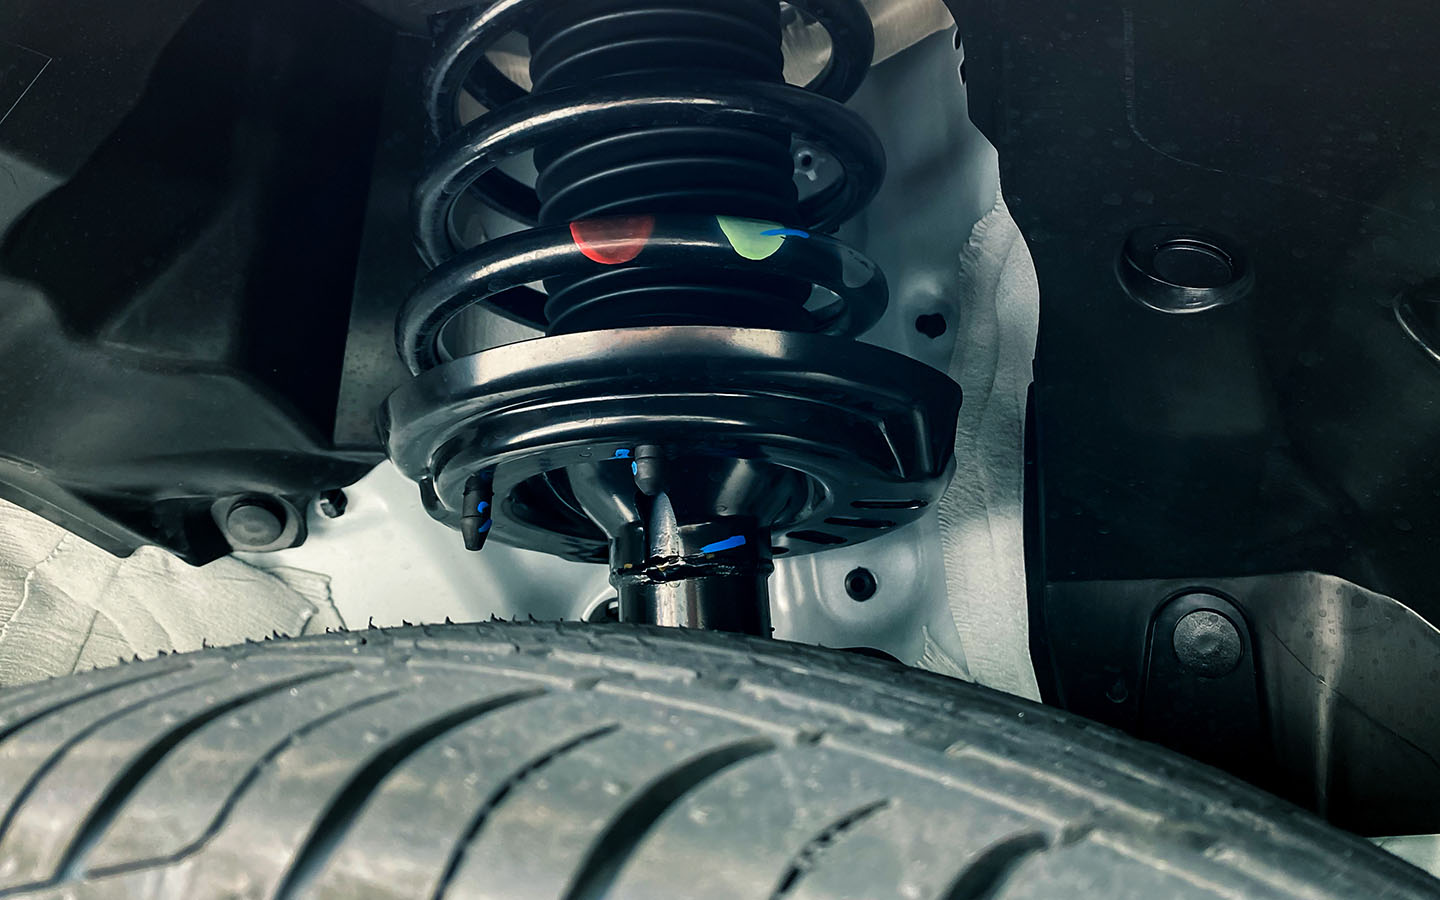 change the car's shock absorbers for Reducing vehicle suspension bounce